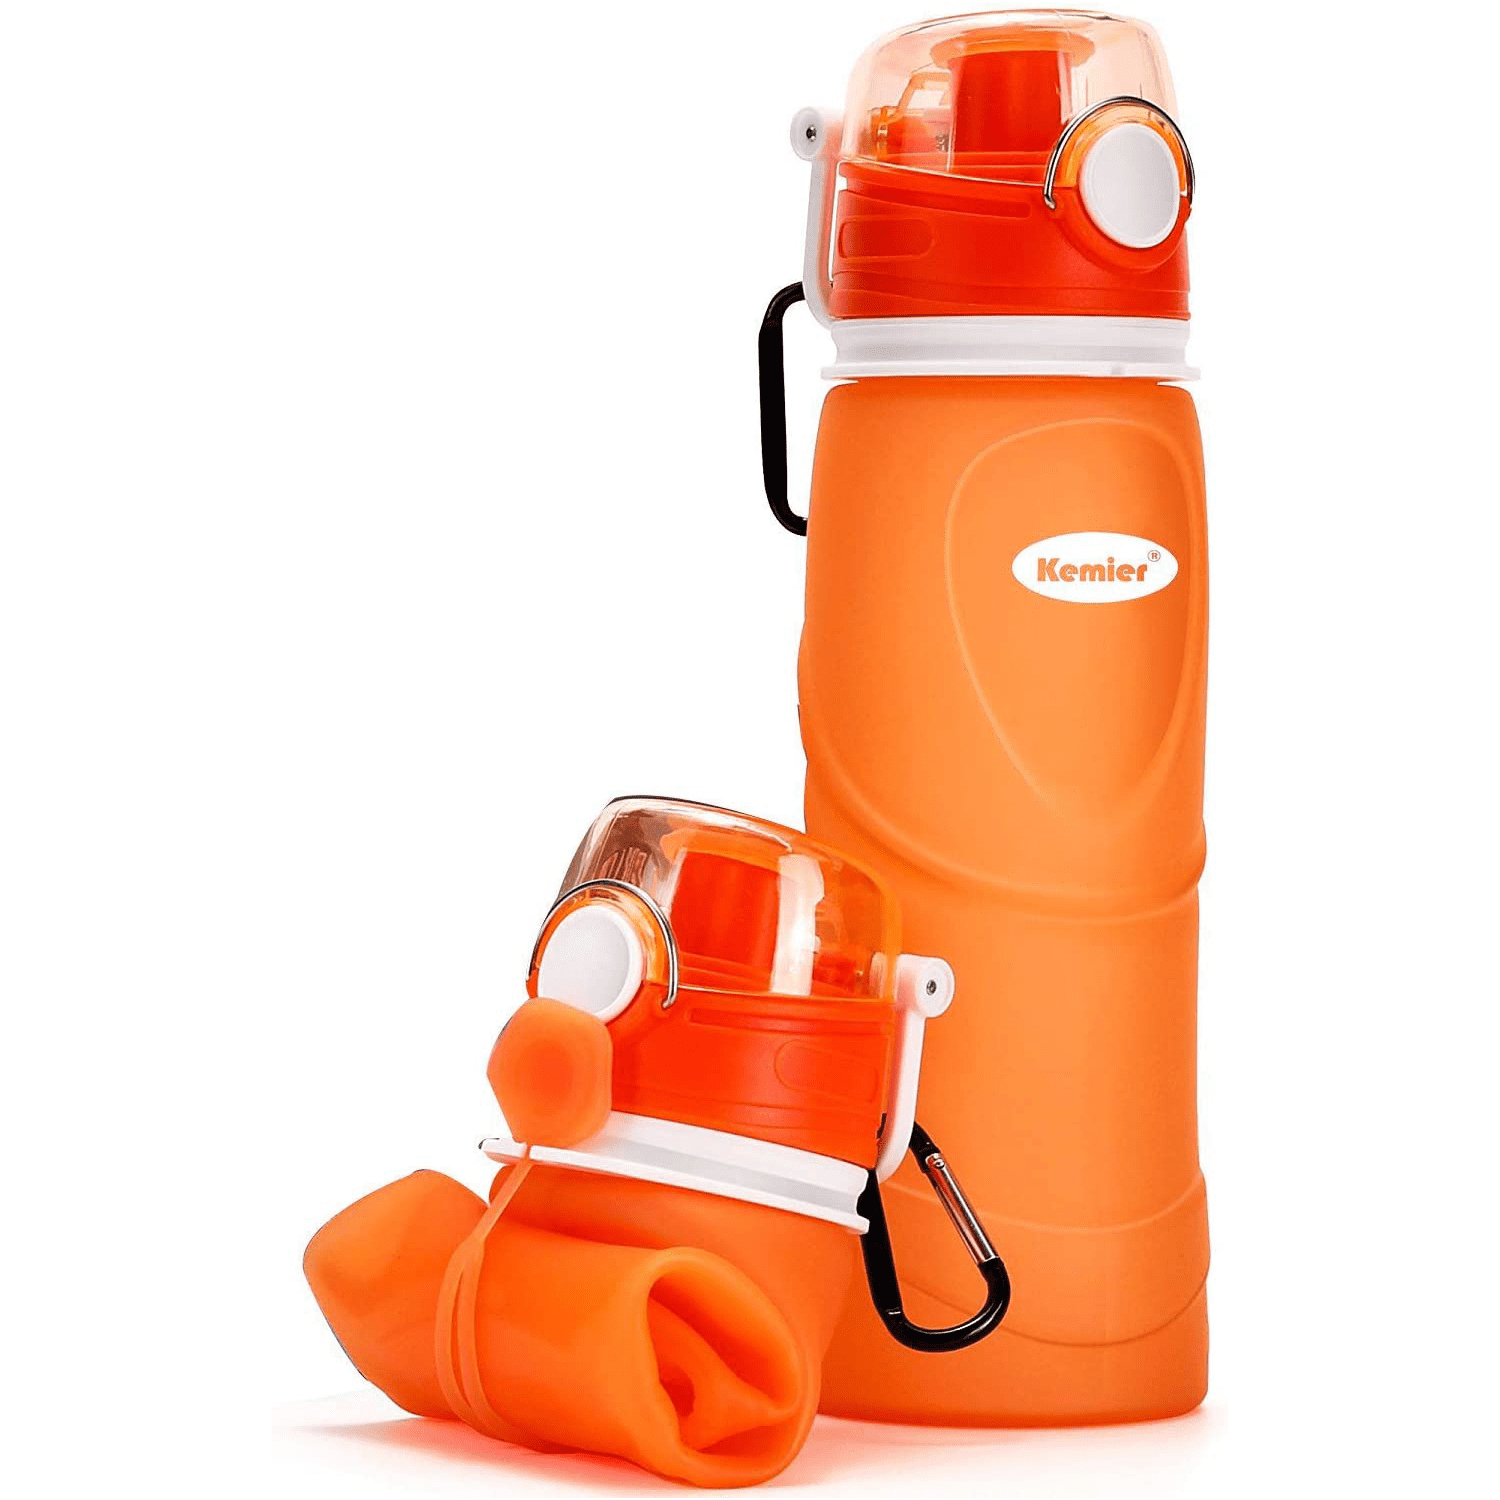 600ml Leak Proof Foldable Sports Water Bottles Silicone Travel Water Bottle  Collapsible and Lightweight for Sports Gym Camping - AliExpress